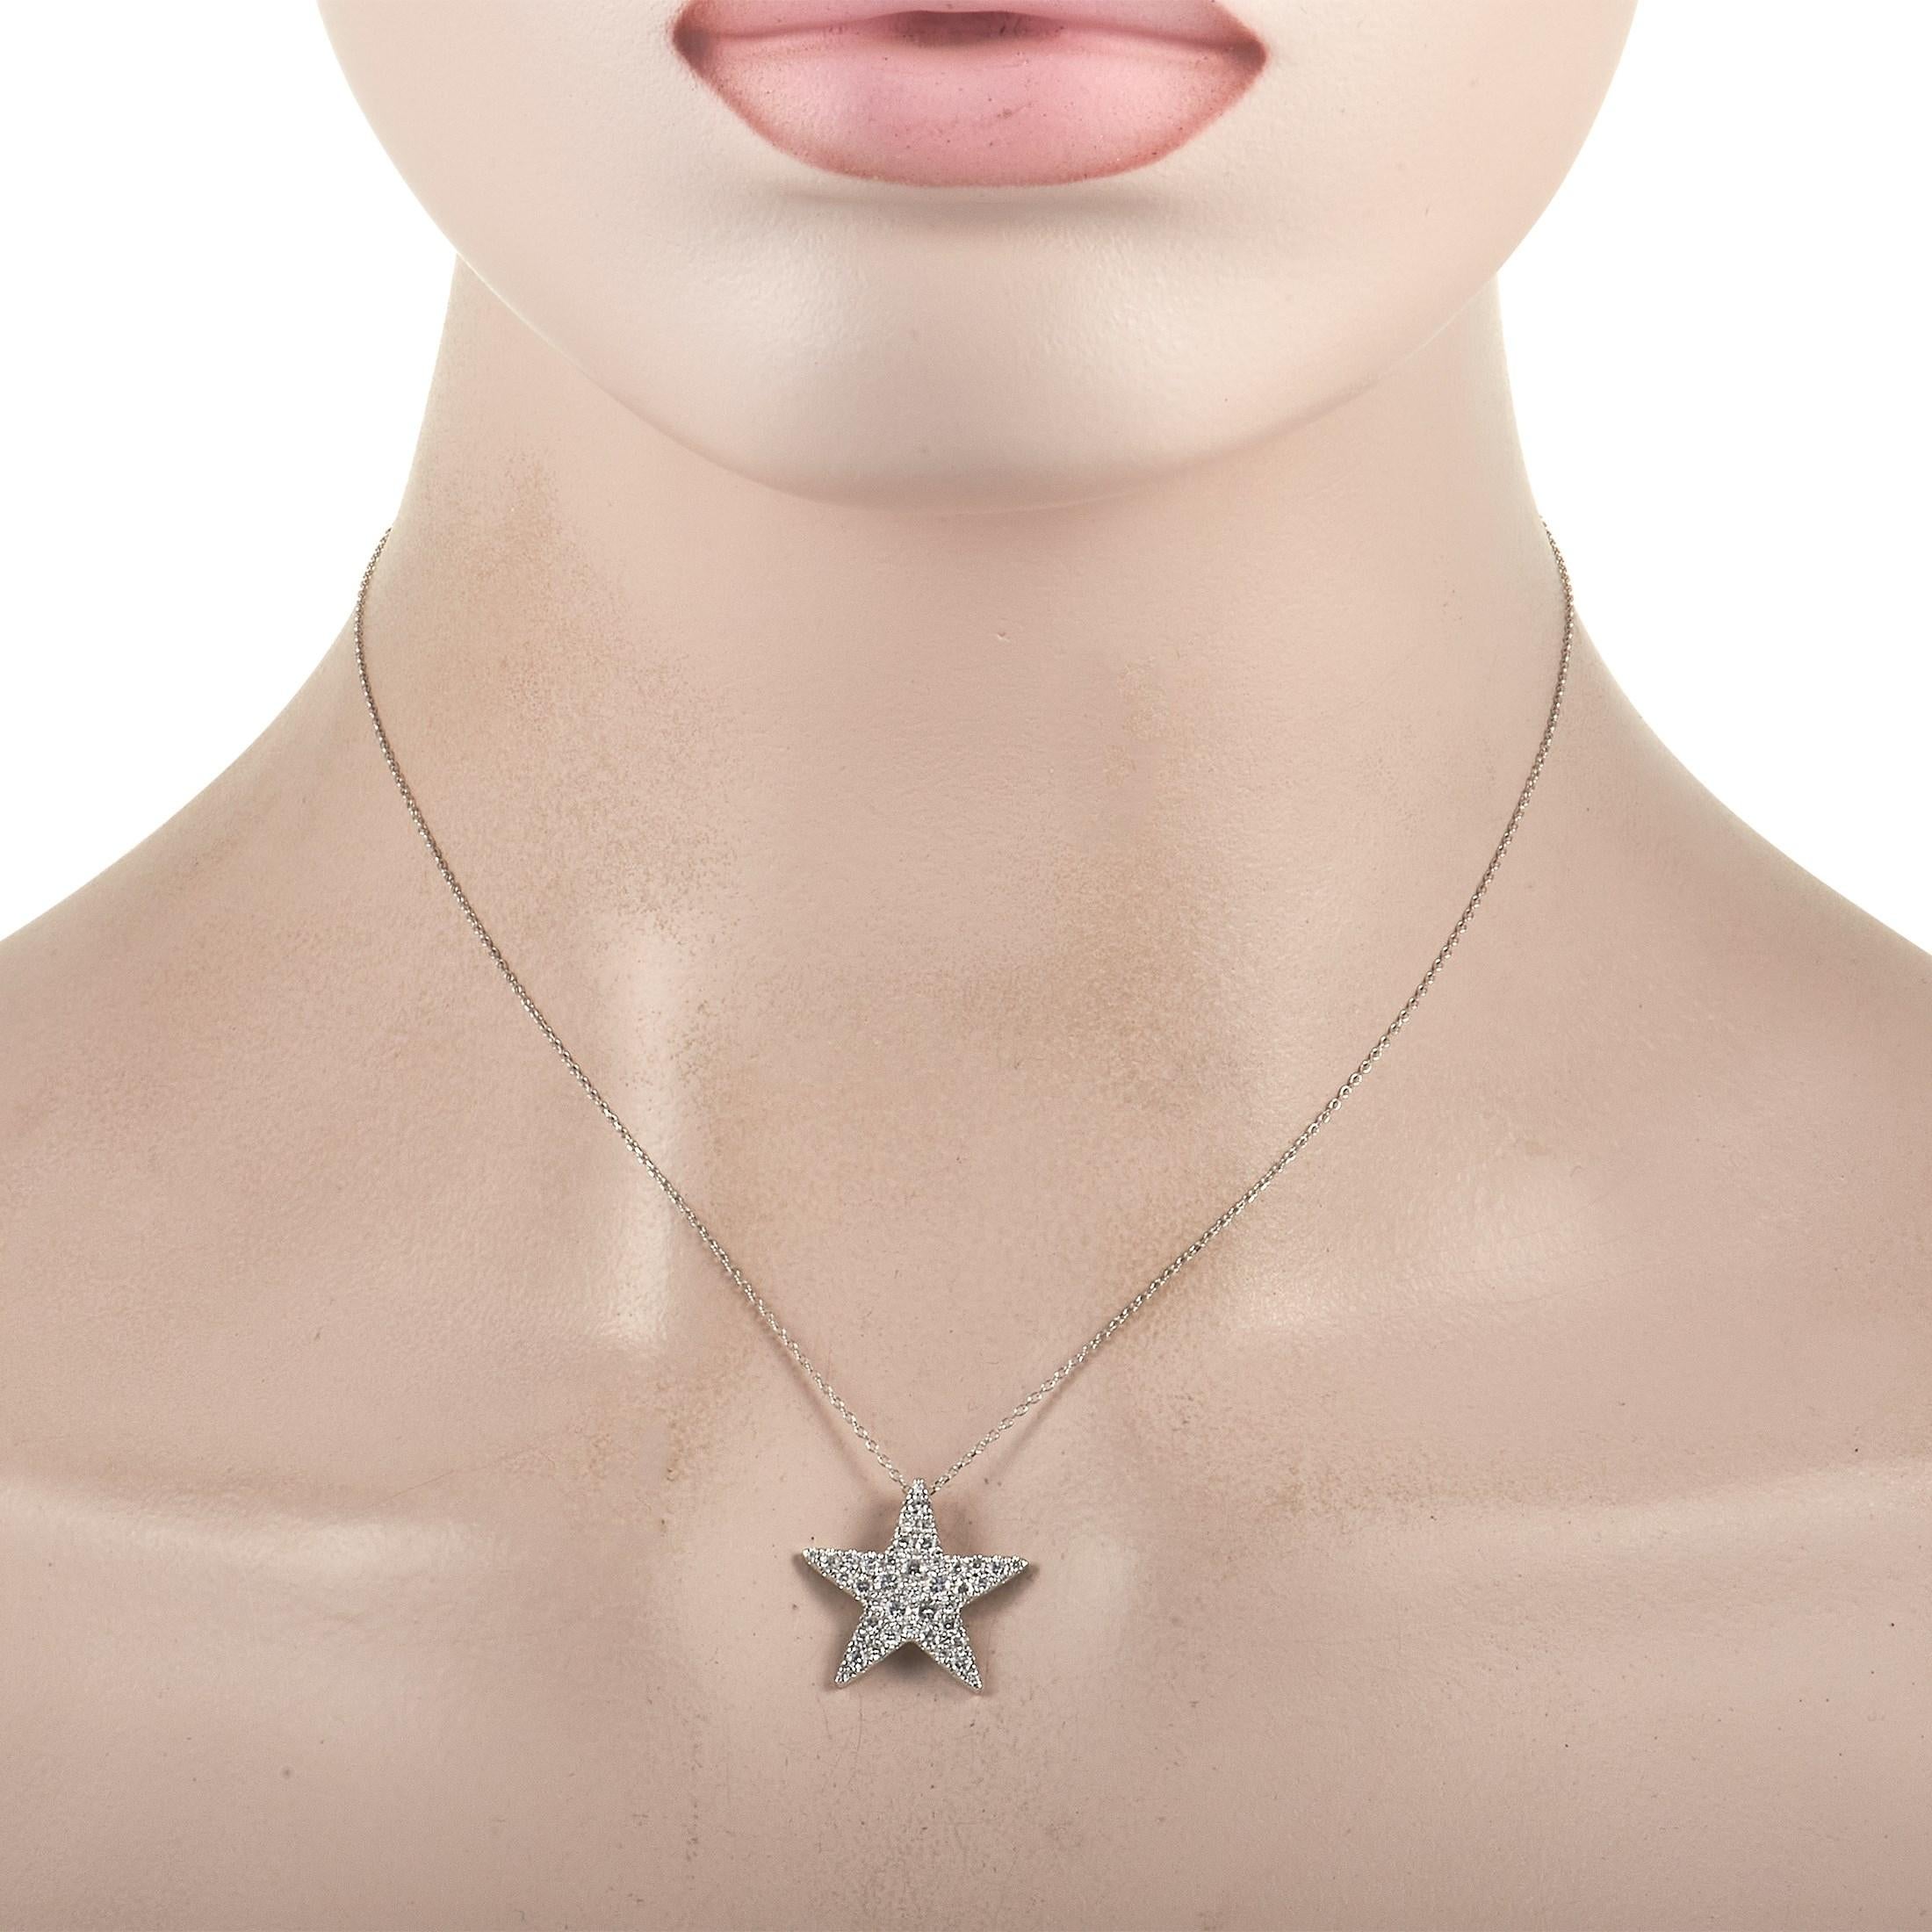 This fun LB Exclusive 18K White Gold 1.00 ct Diamond Star Necklace is sure to attract attention! The necklace features a white gold chain, highlighting a sweet matching 18K white gold star pendant set with a total of 1.00 carats of round-cut